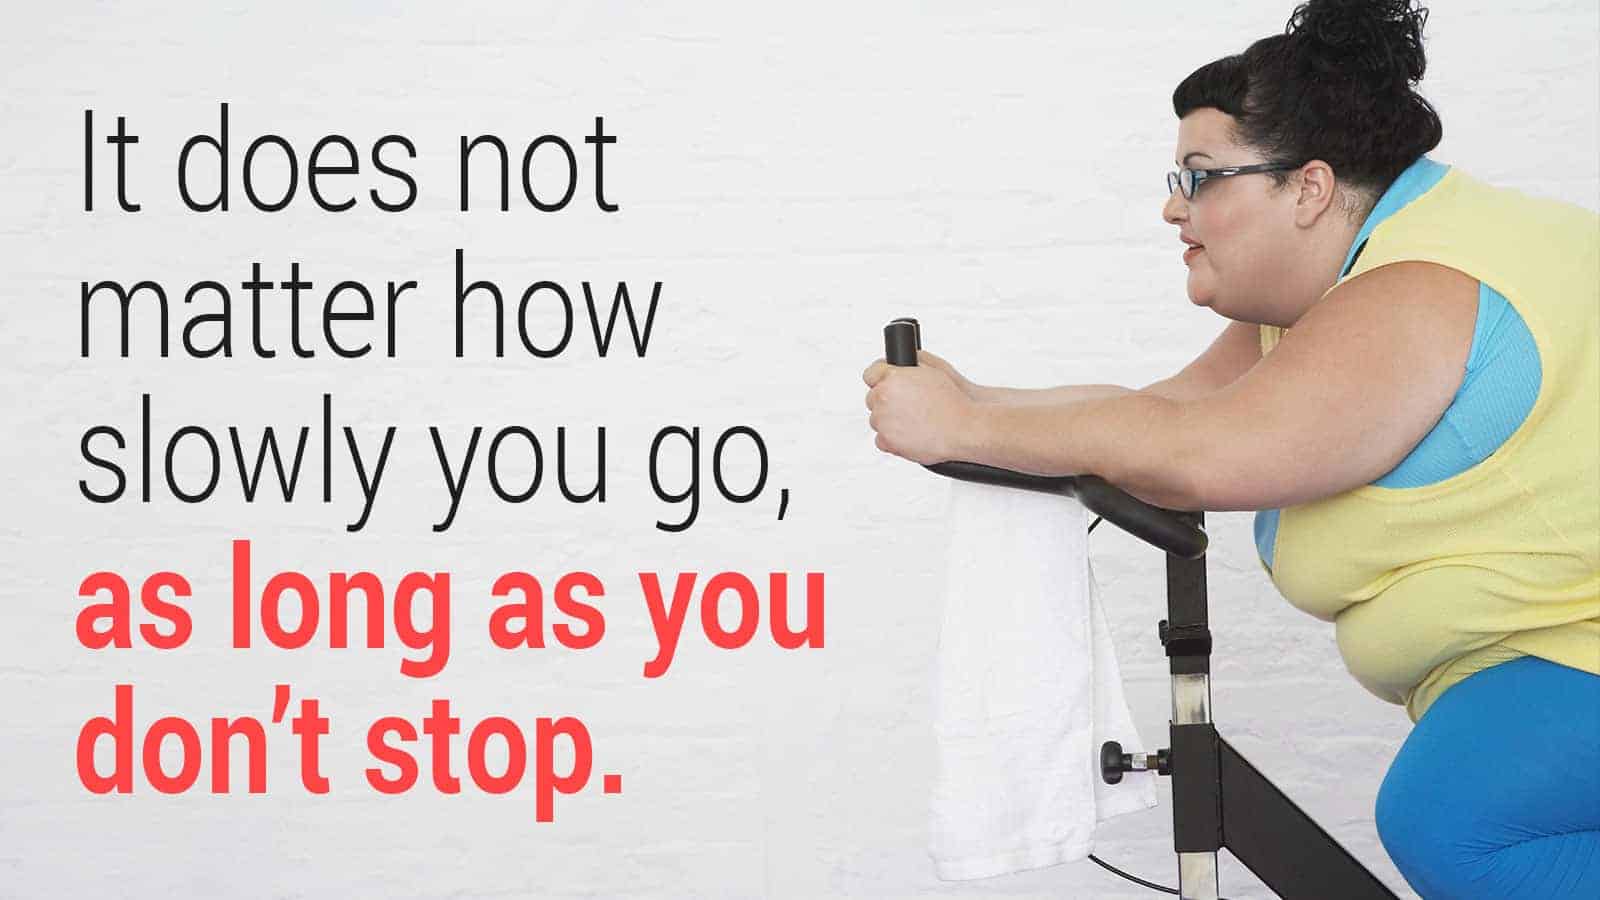 15 Motivational Quotes About Weight Loss to Never Forget | 5 MIn Read